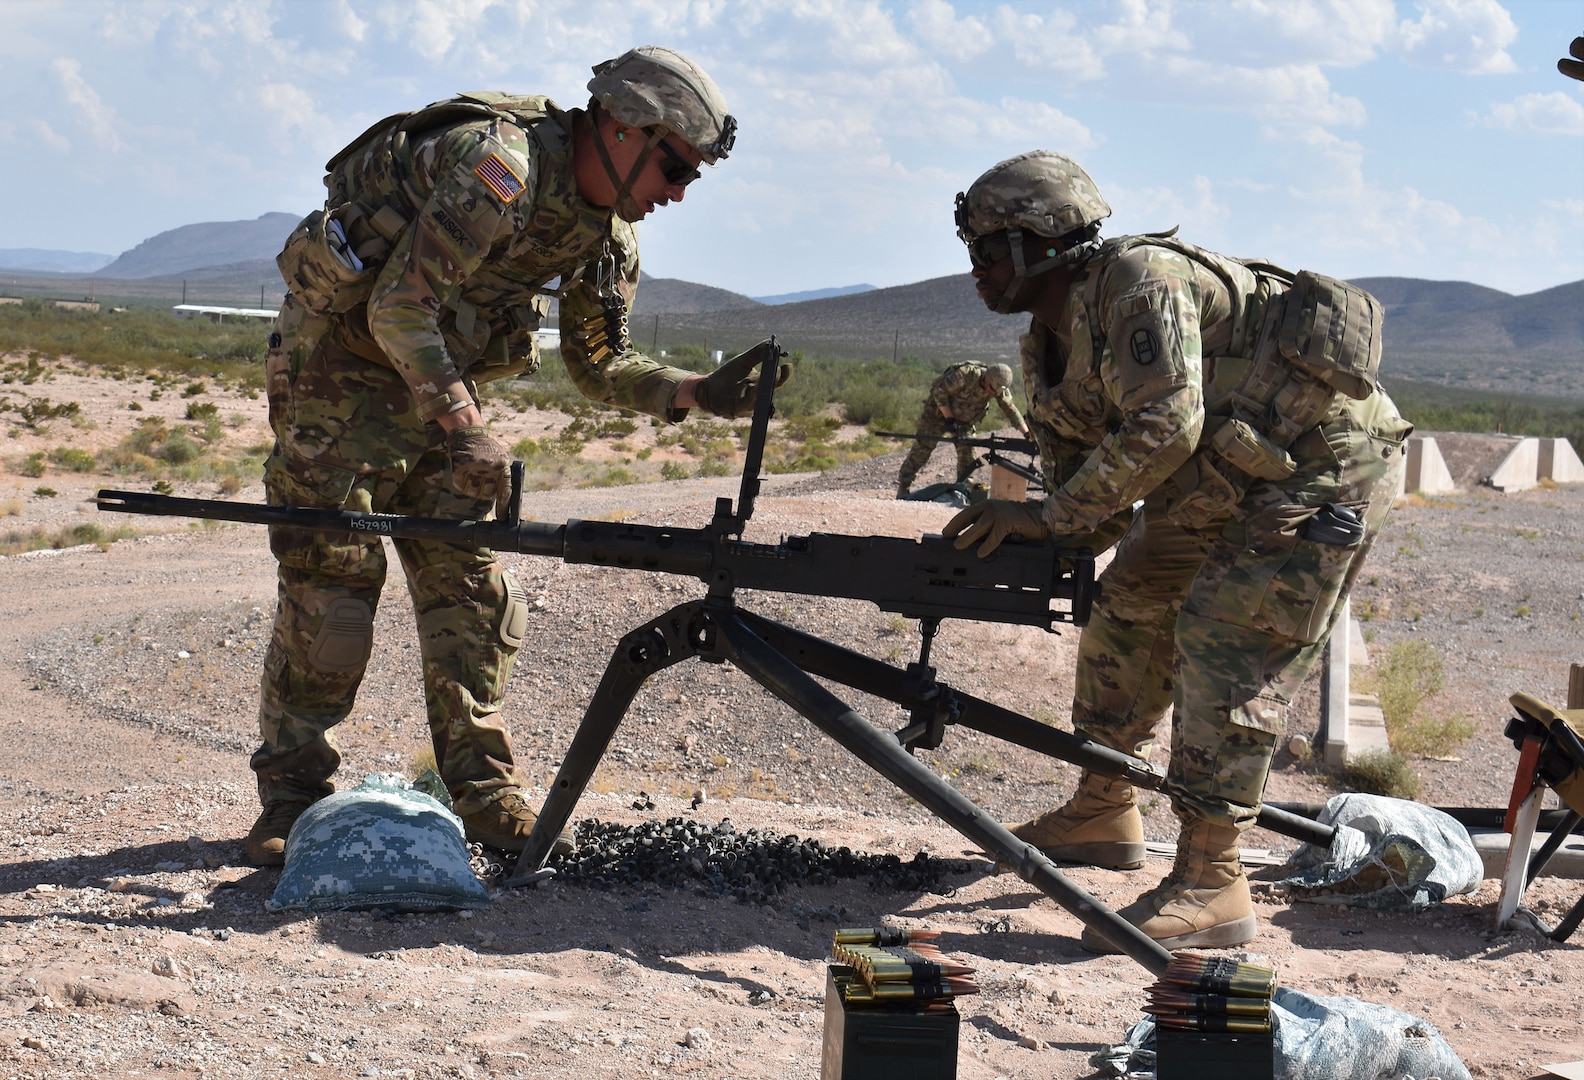 U.S. Soldiers in Echo Company, 236th Brigade Engineer Battalion, 30th Armored Brigade Combat Team, North Carolina National Guard, fire the M2 .50 caliber machine gun in the vicinity of Fort Bliss, Texas, August 27, 2019.